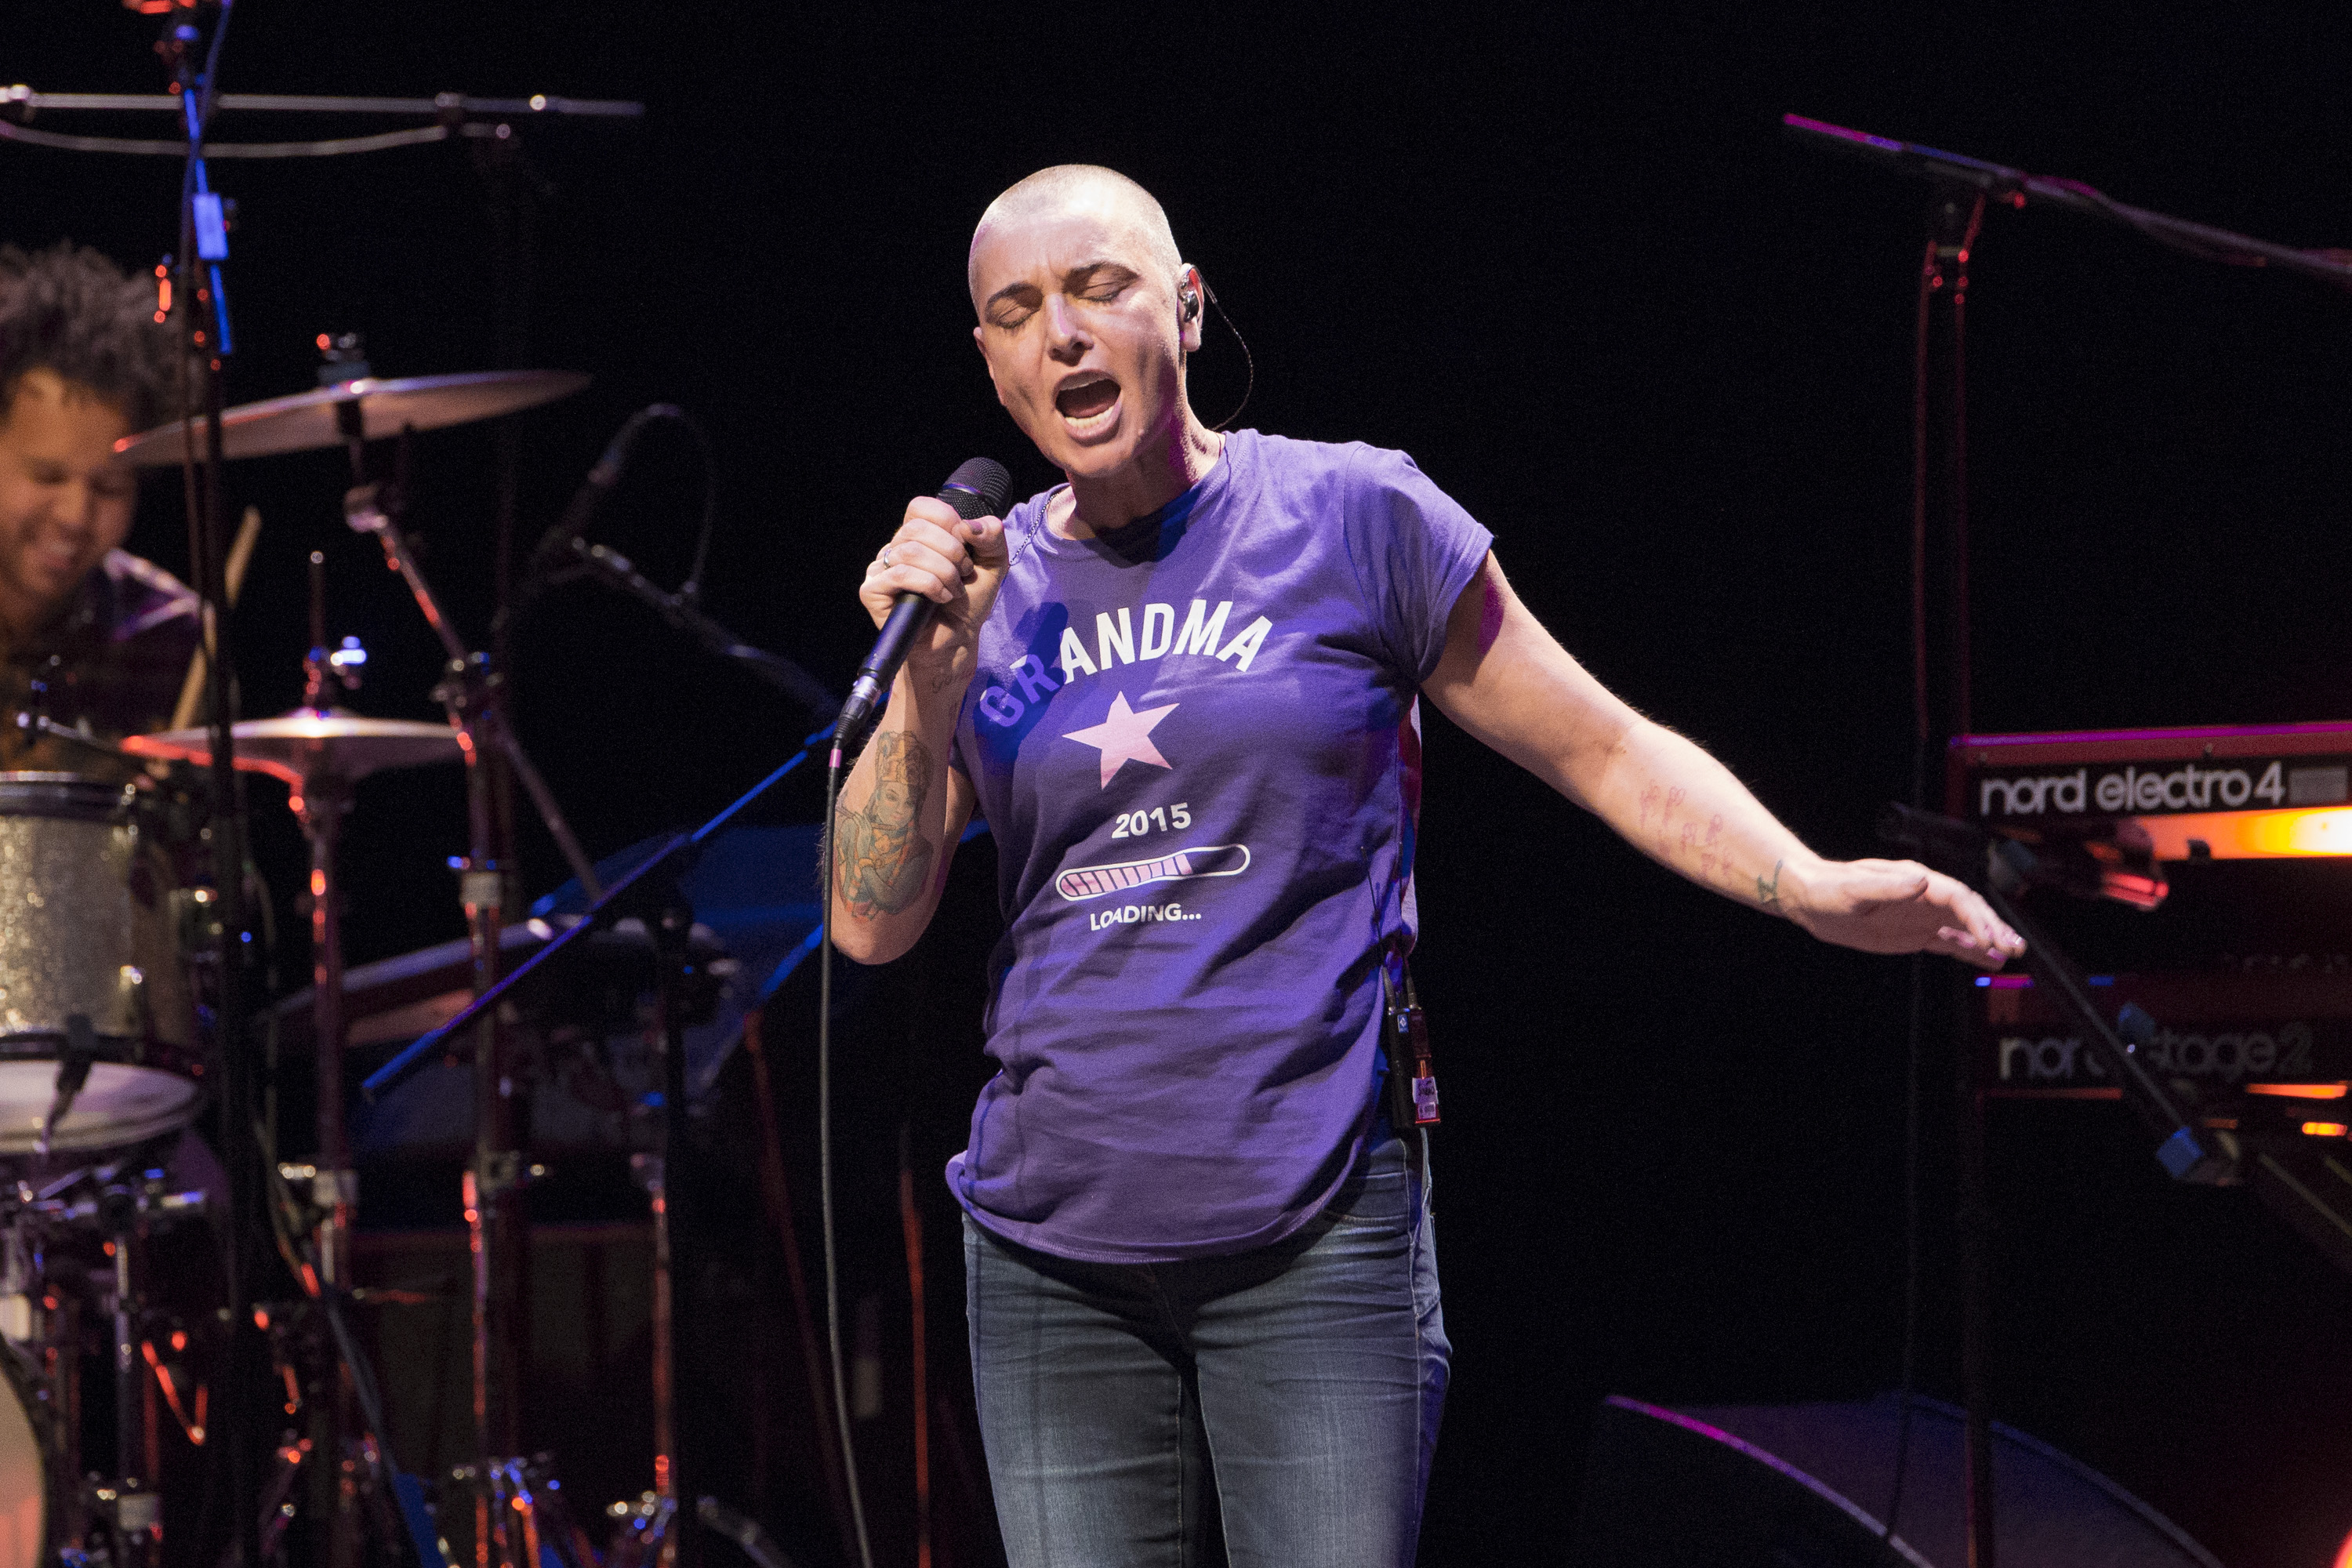 Sinead O'Connor performs on stage at Barbican Centre on April 13, 2015, in London, United Kingdom. | Source: Getty Images